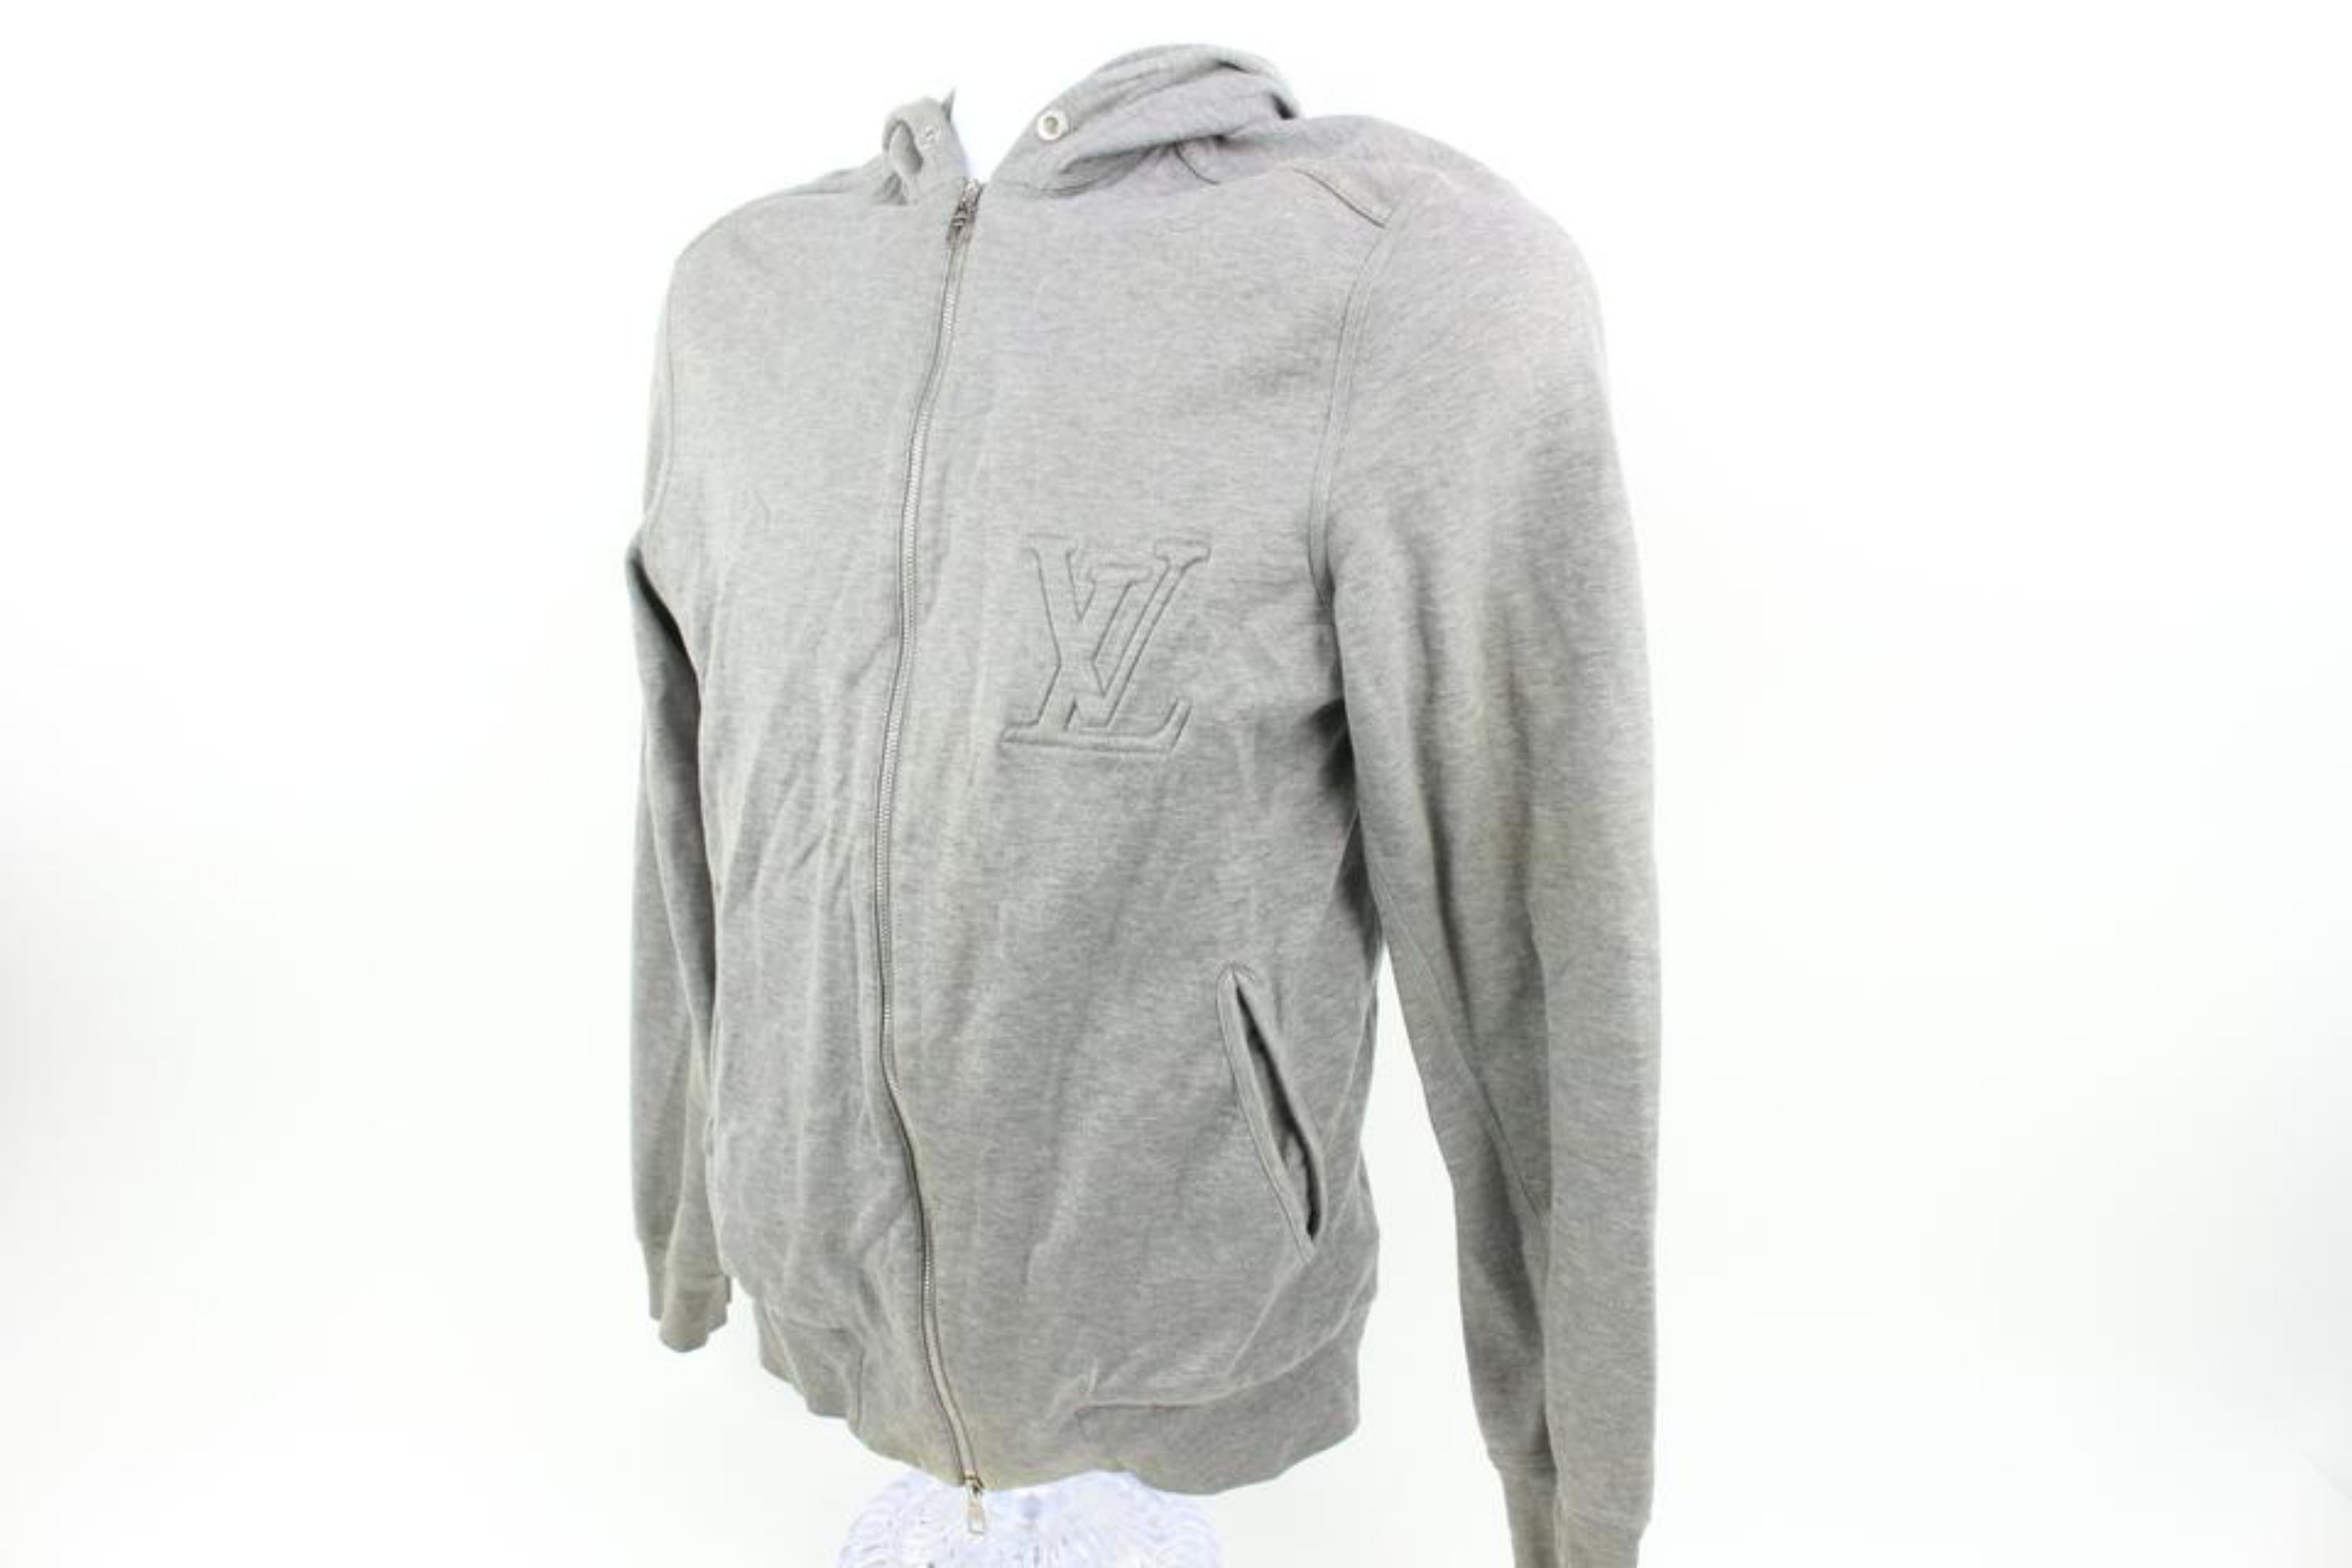 Sold at Auction: A Large Louis Vuitton Branded Mens Hoodie